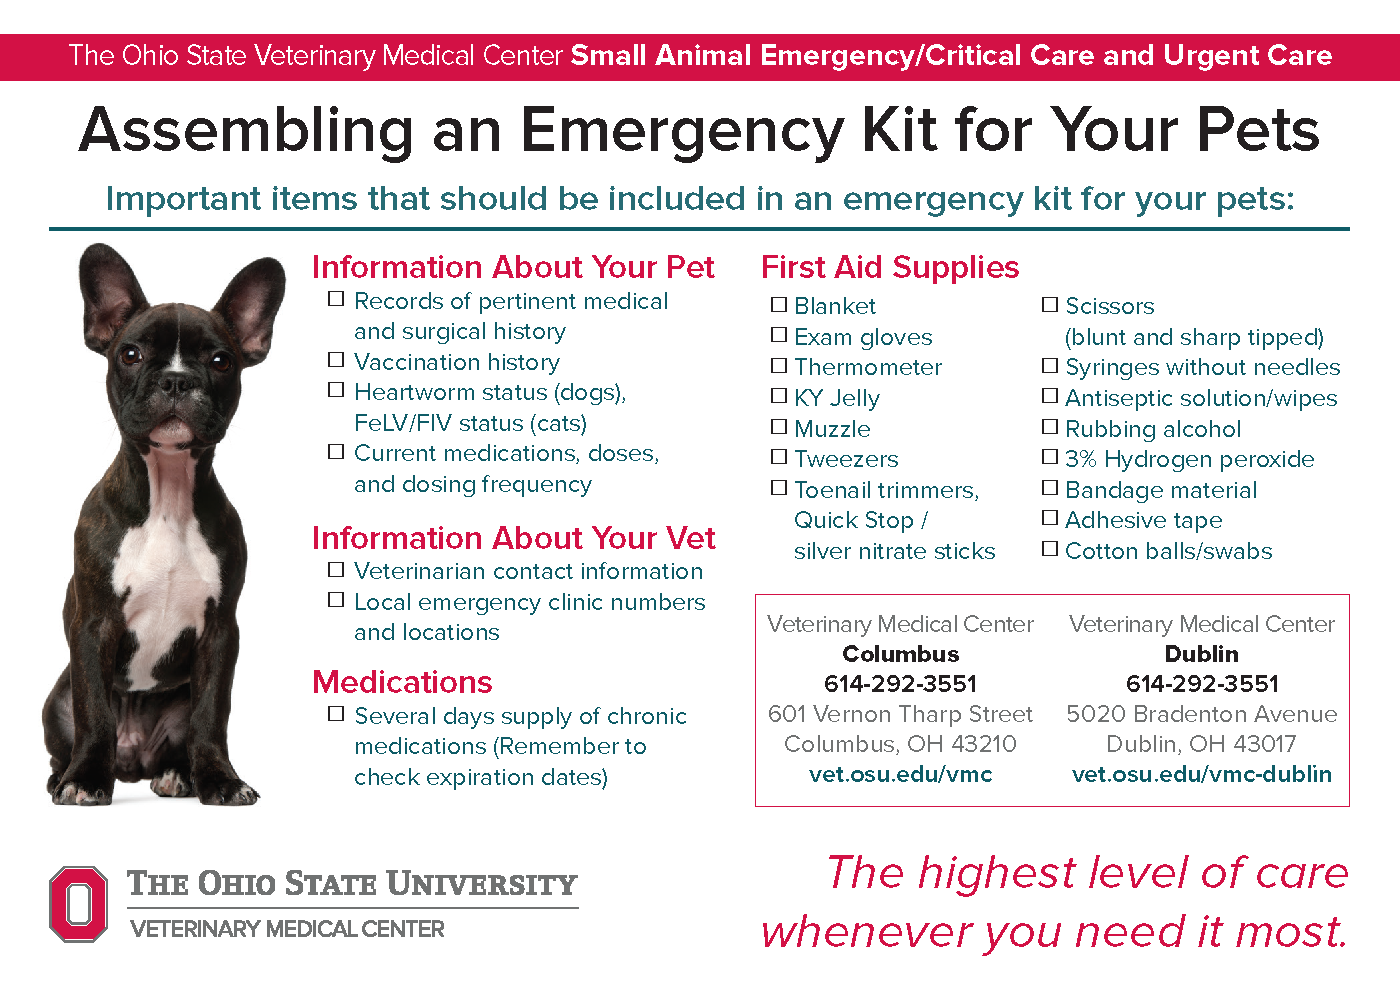 Assembling an Emergency Kit for Your Pets